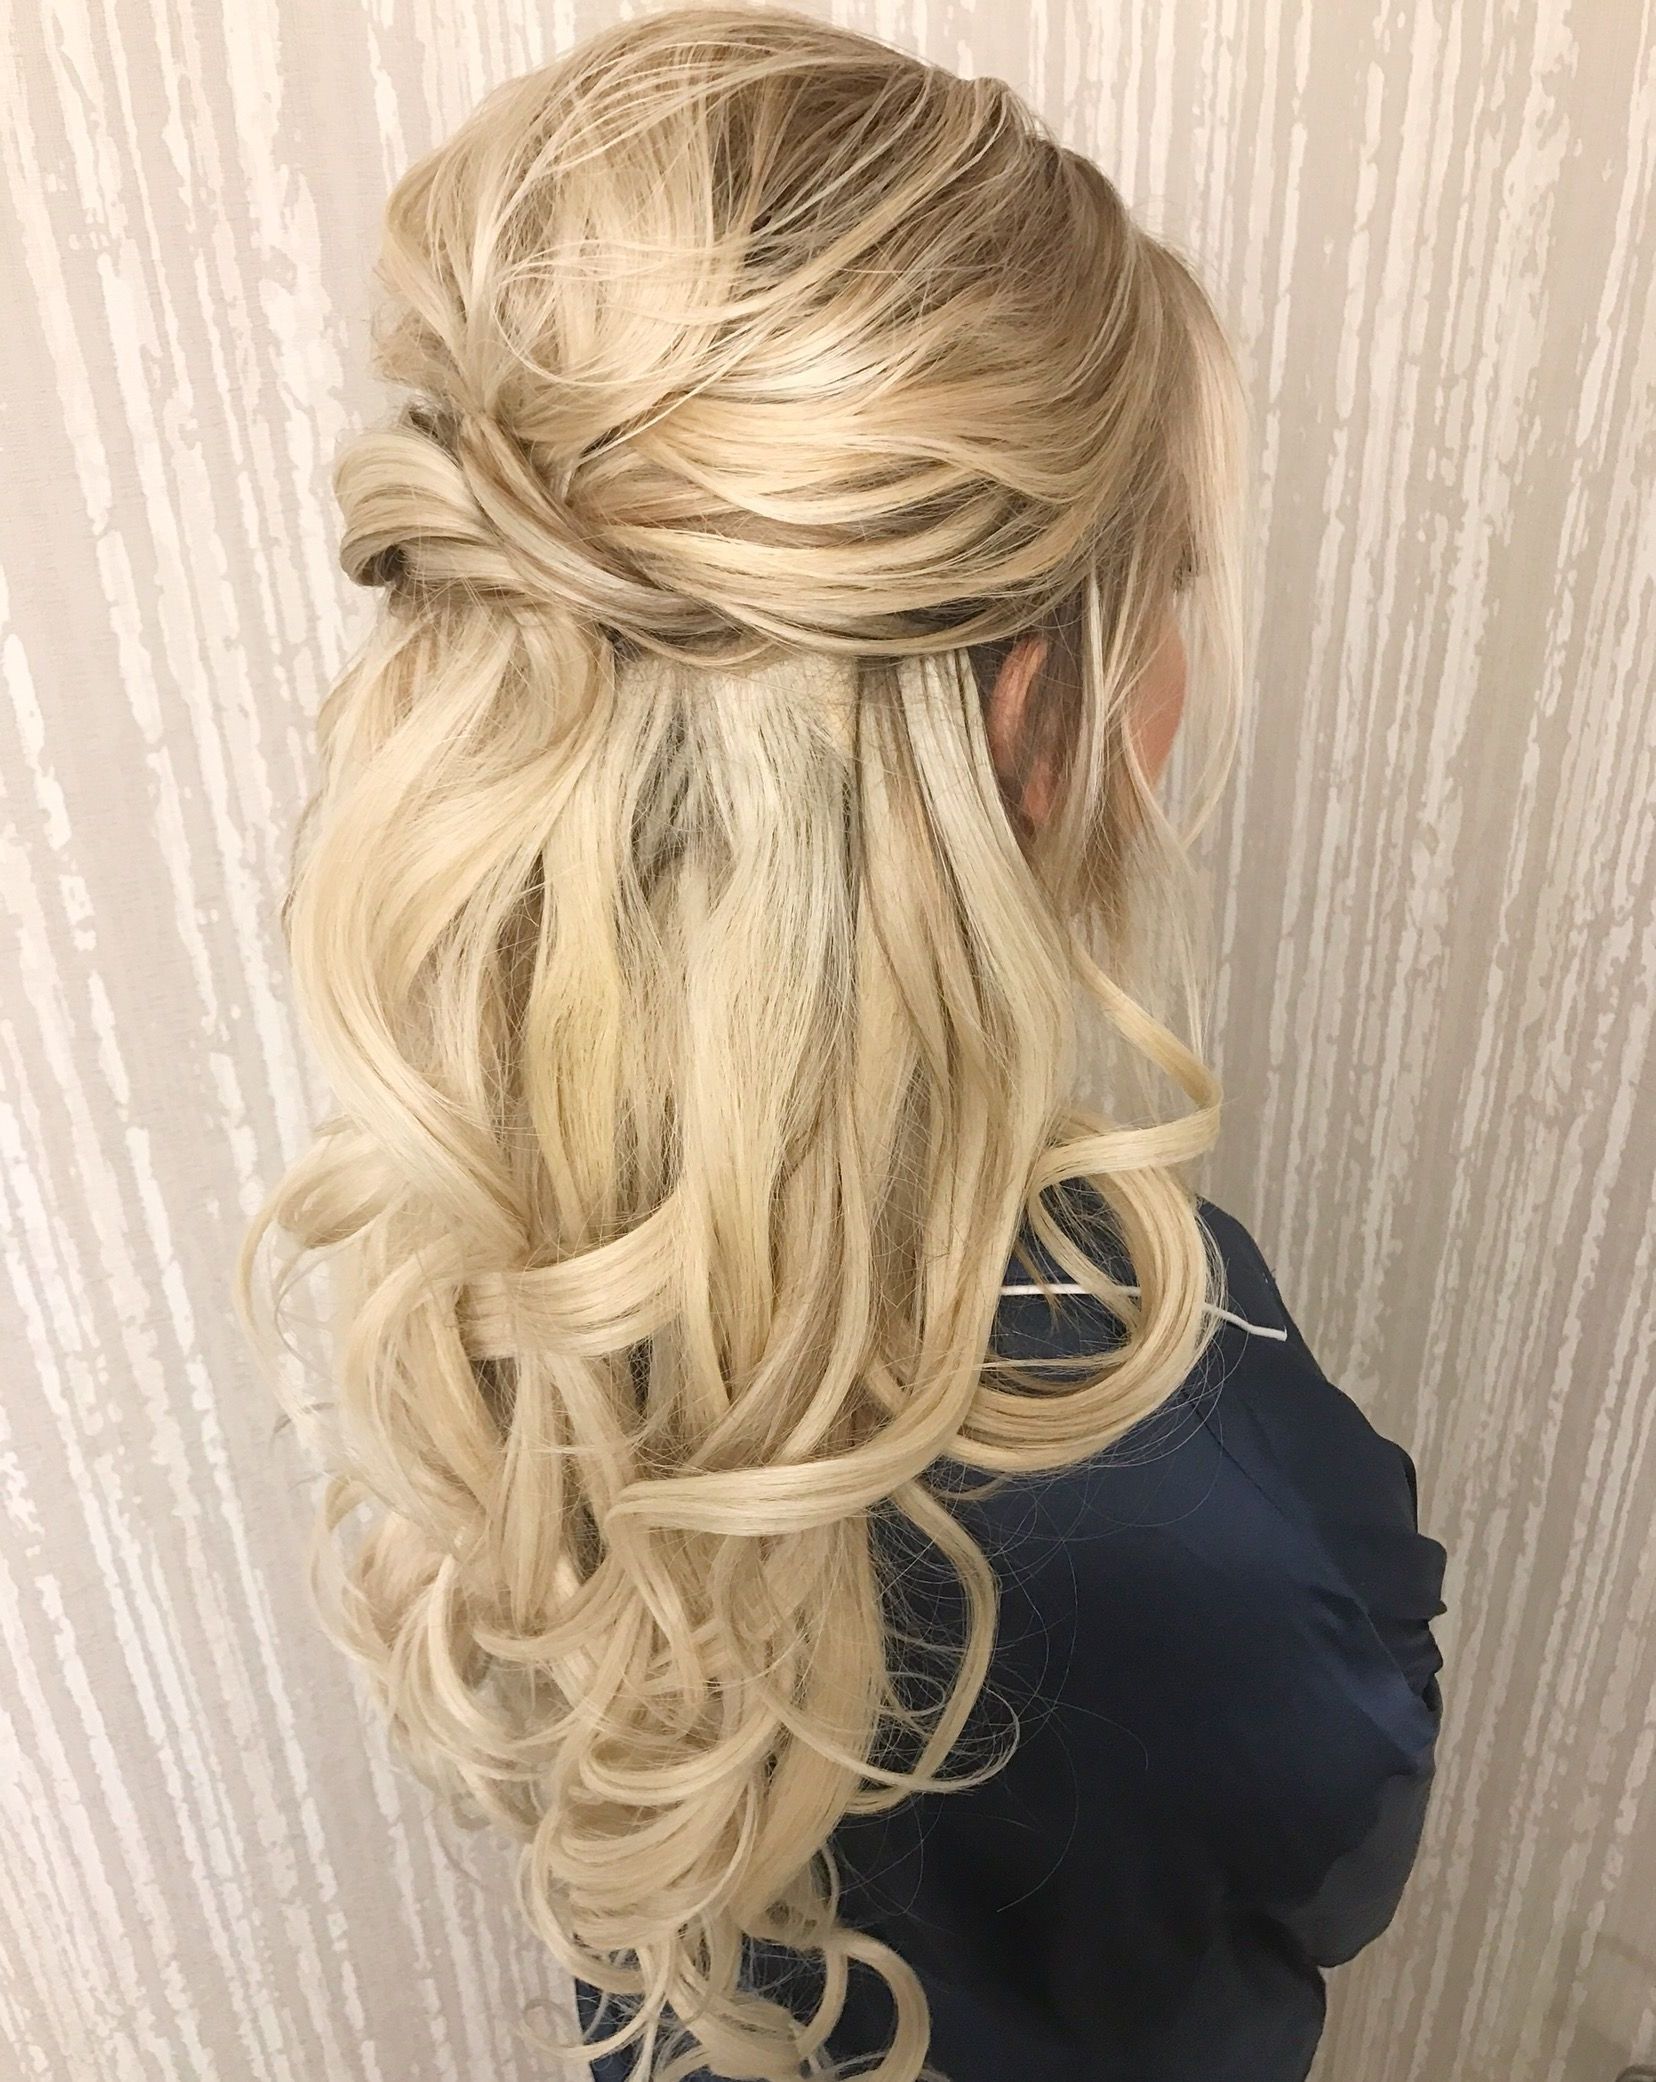 Half Up Half Down@shelbywhite Hmu | Hair | Pinterest | Wedding Intended For Wedding Half Updo Hairstyles (View 1 of 15)